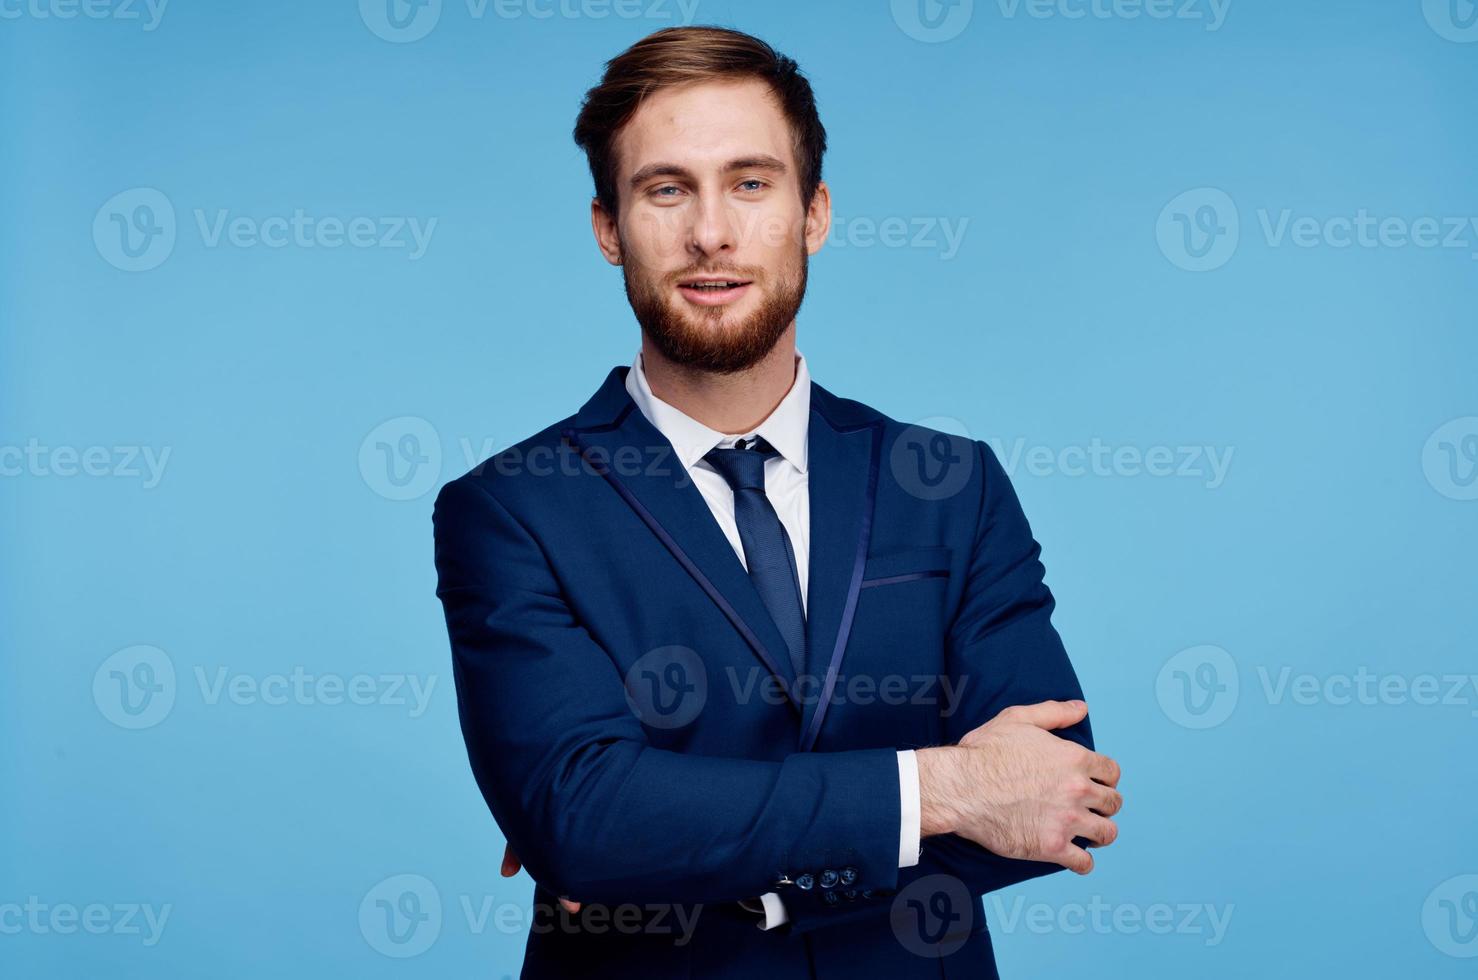 man in suit finance success emotions executive photo